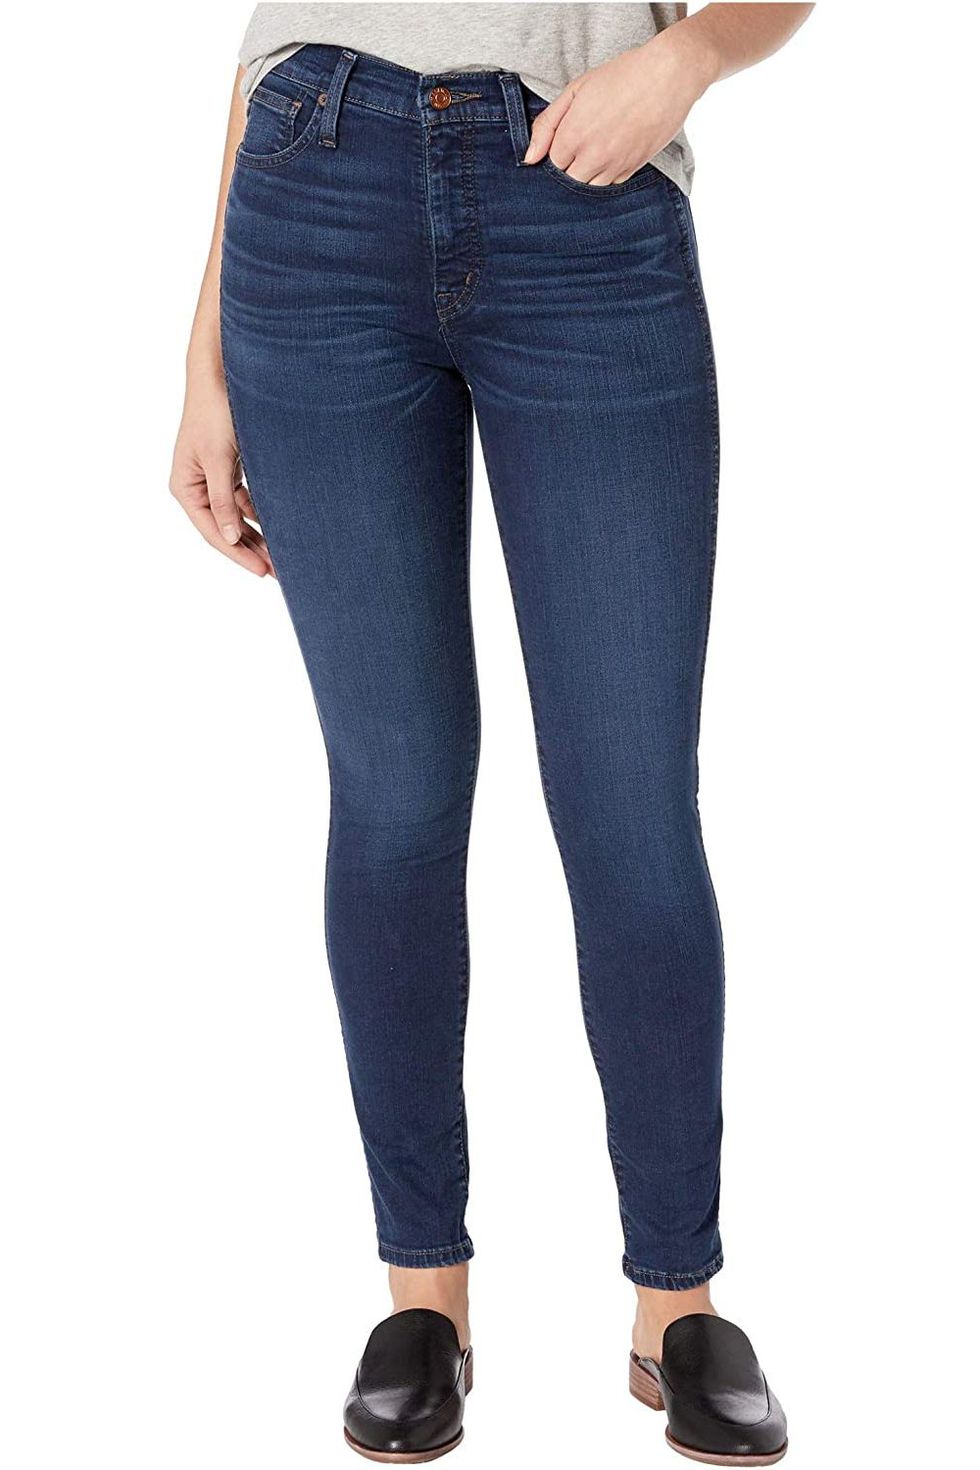 12 Perfect Pairs of Jeans We Found on Amazon